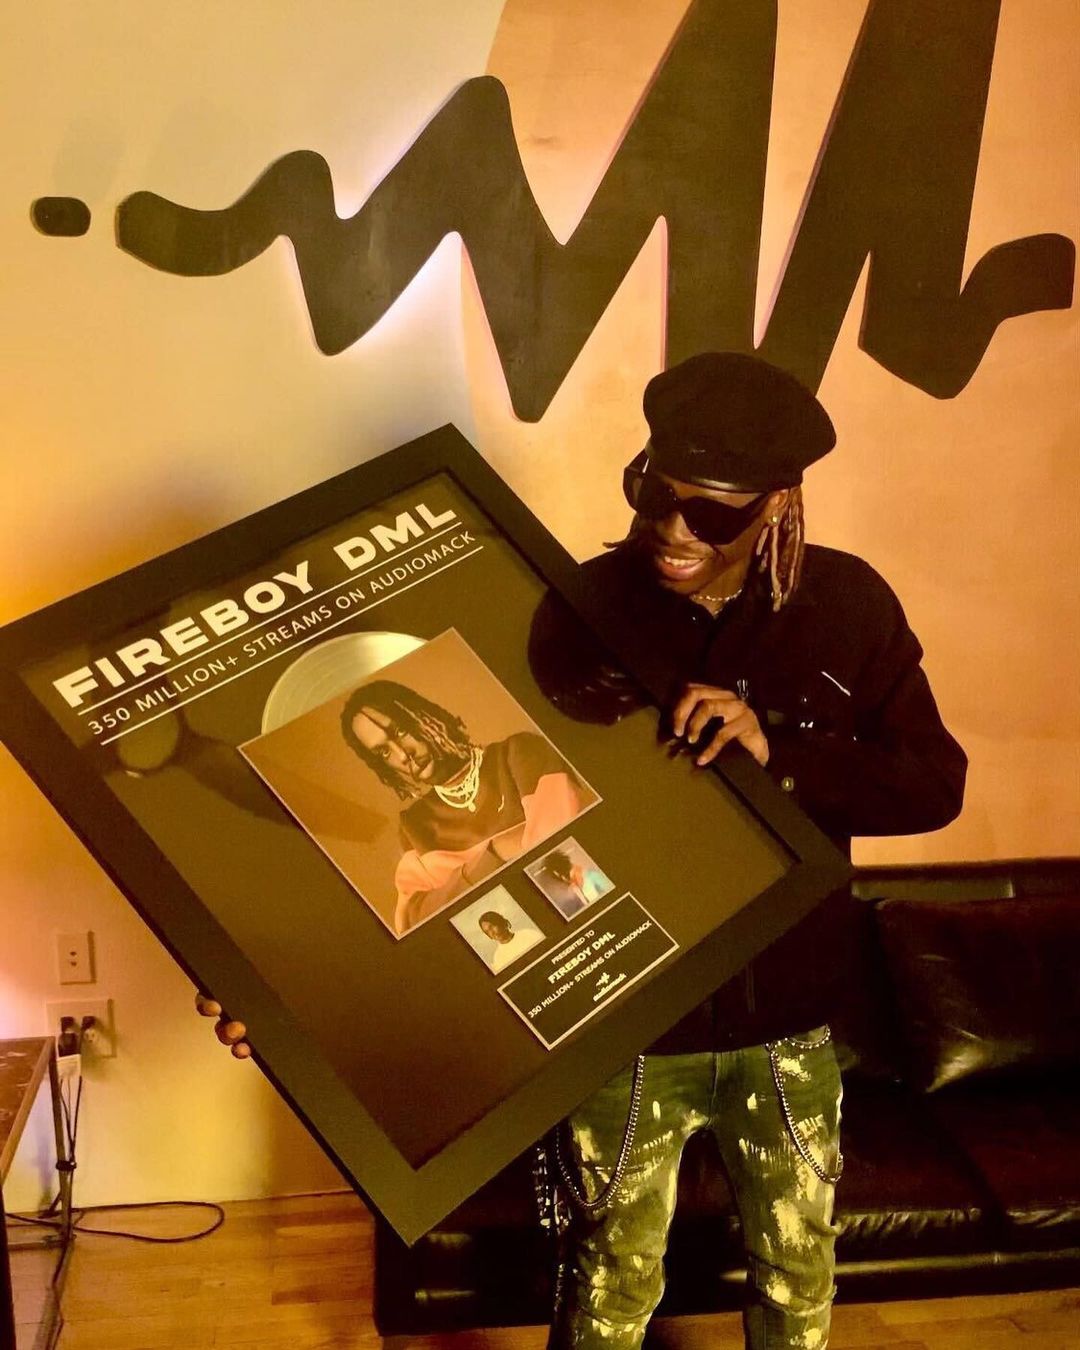 Fireboy DML Gets AudioMack Plaque For Achieving Over 350 Million Streams (Photos)